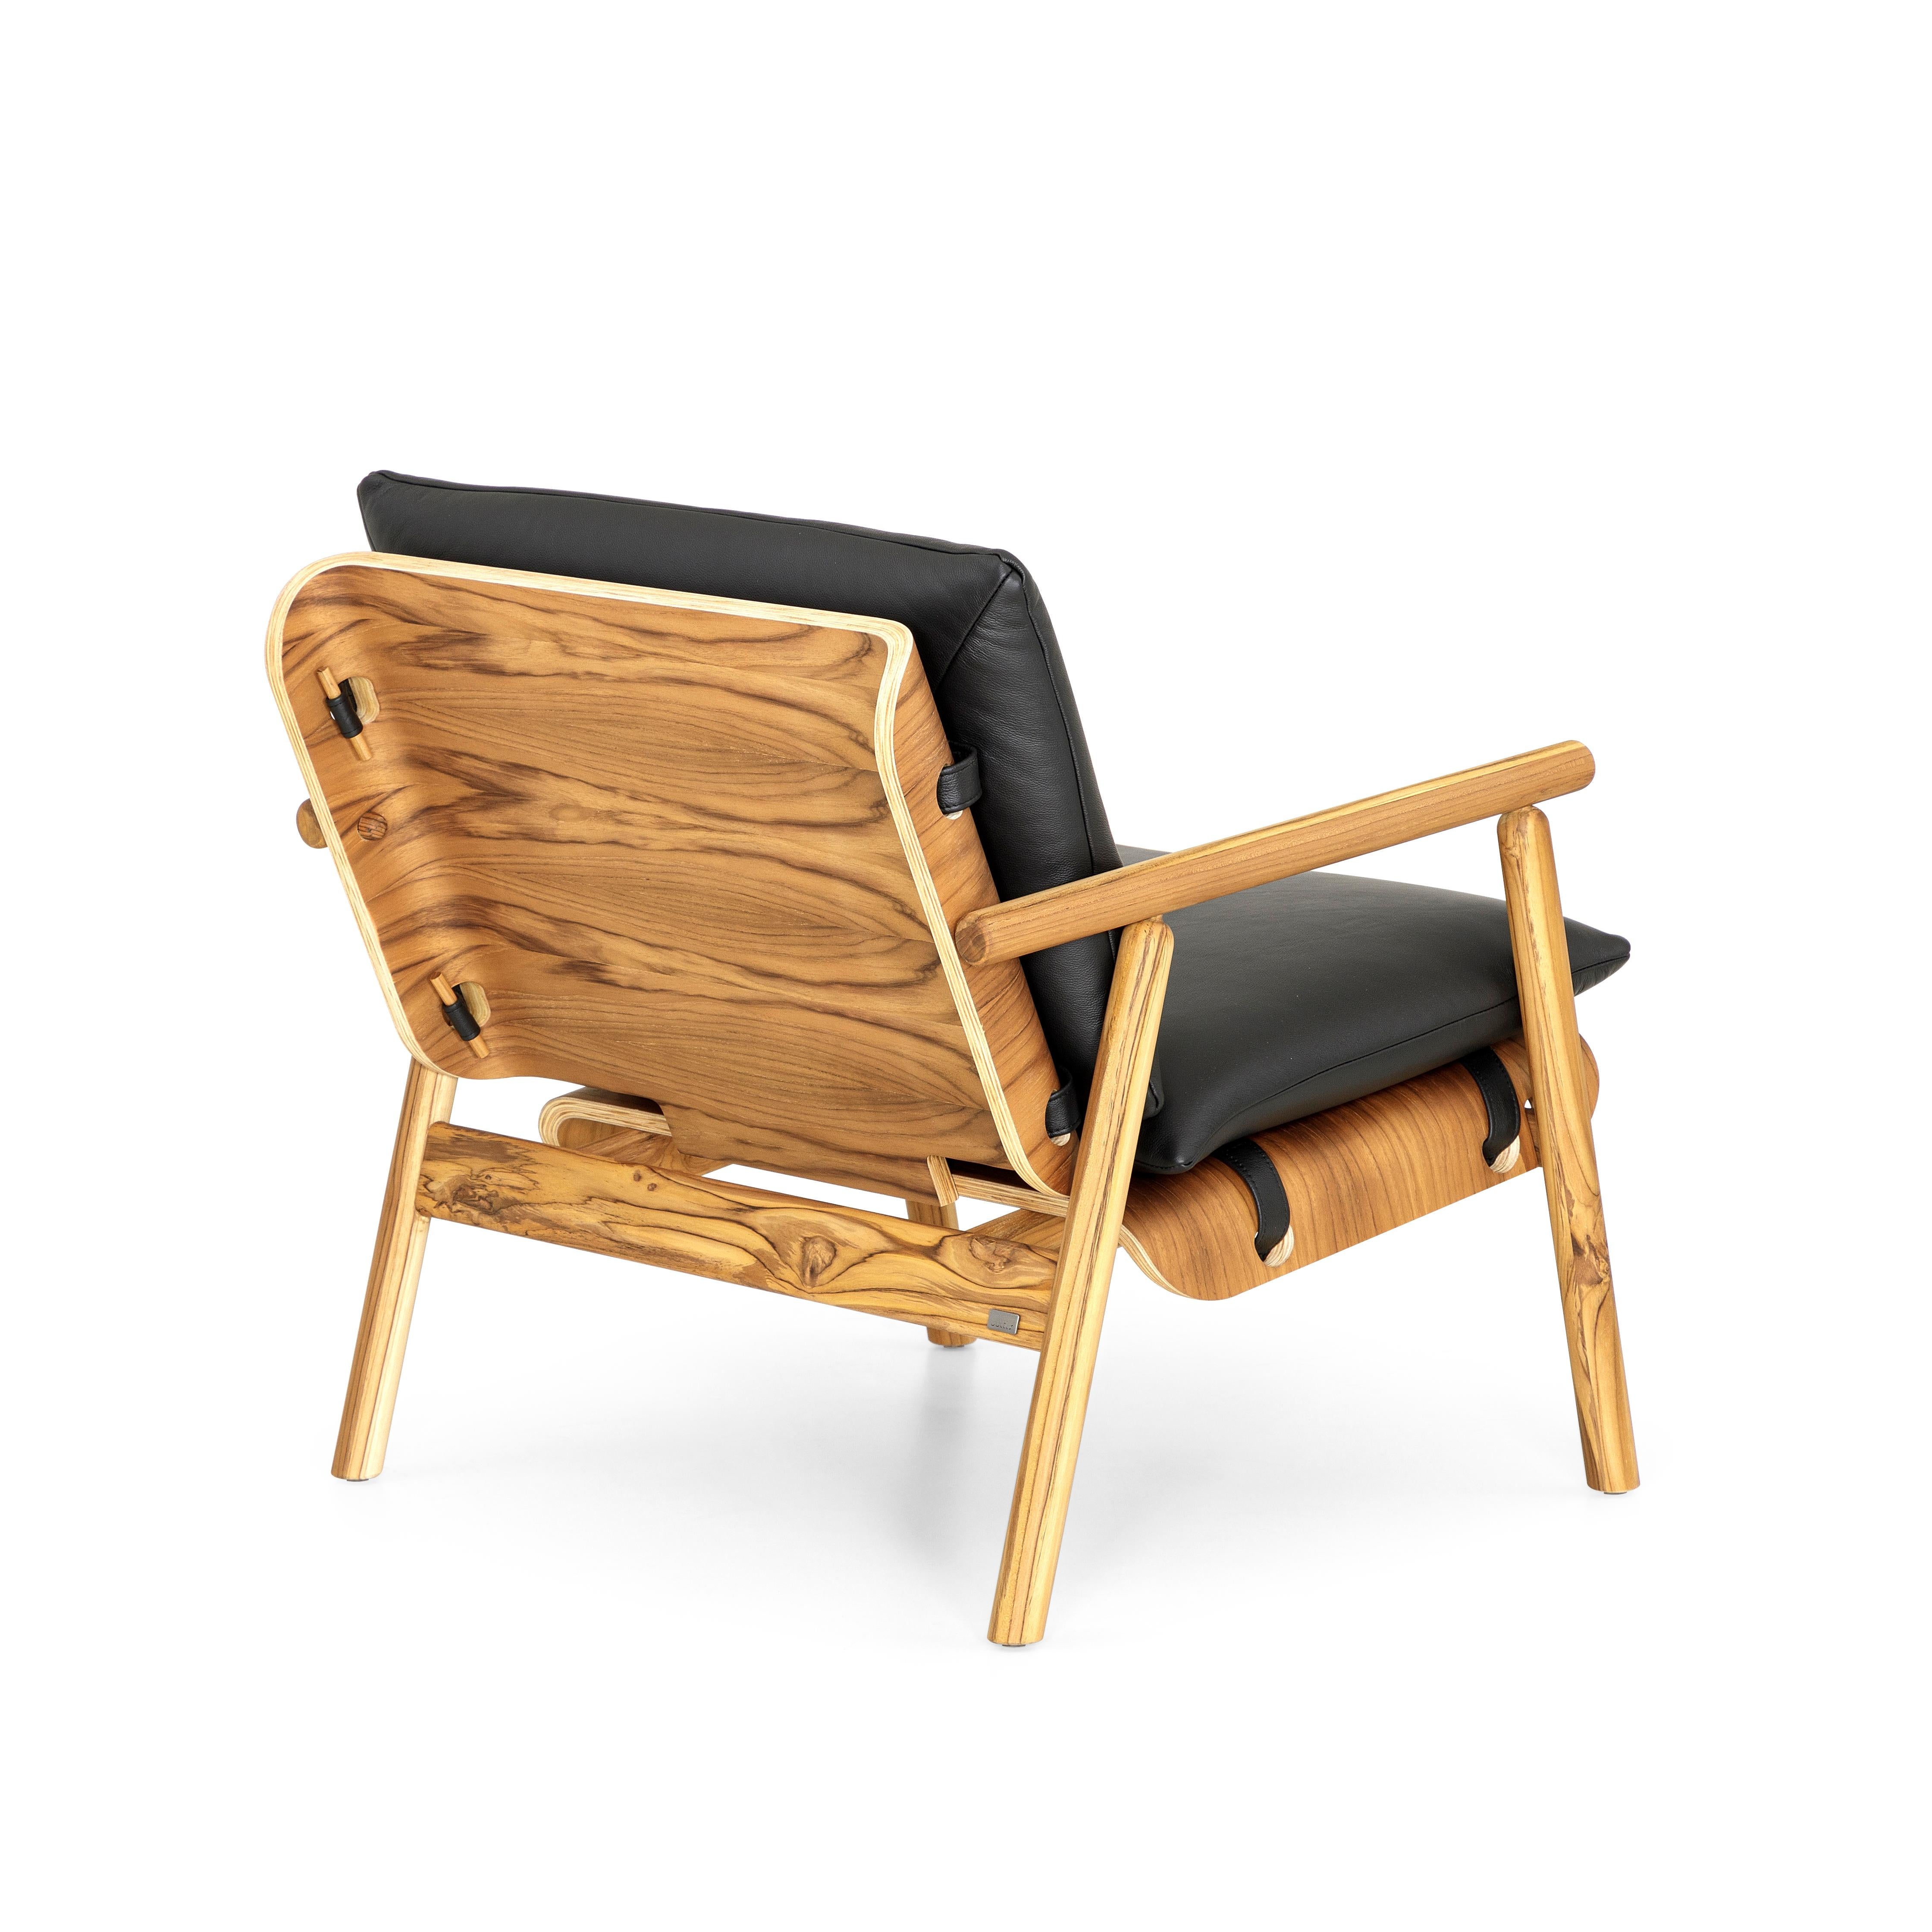 Brazilian Tai Armchair in Teak Wood Finish with Black Leather Cushions For Sale